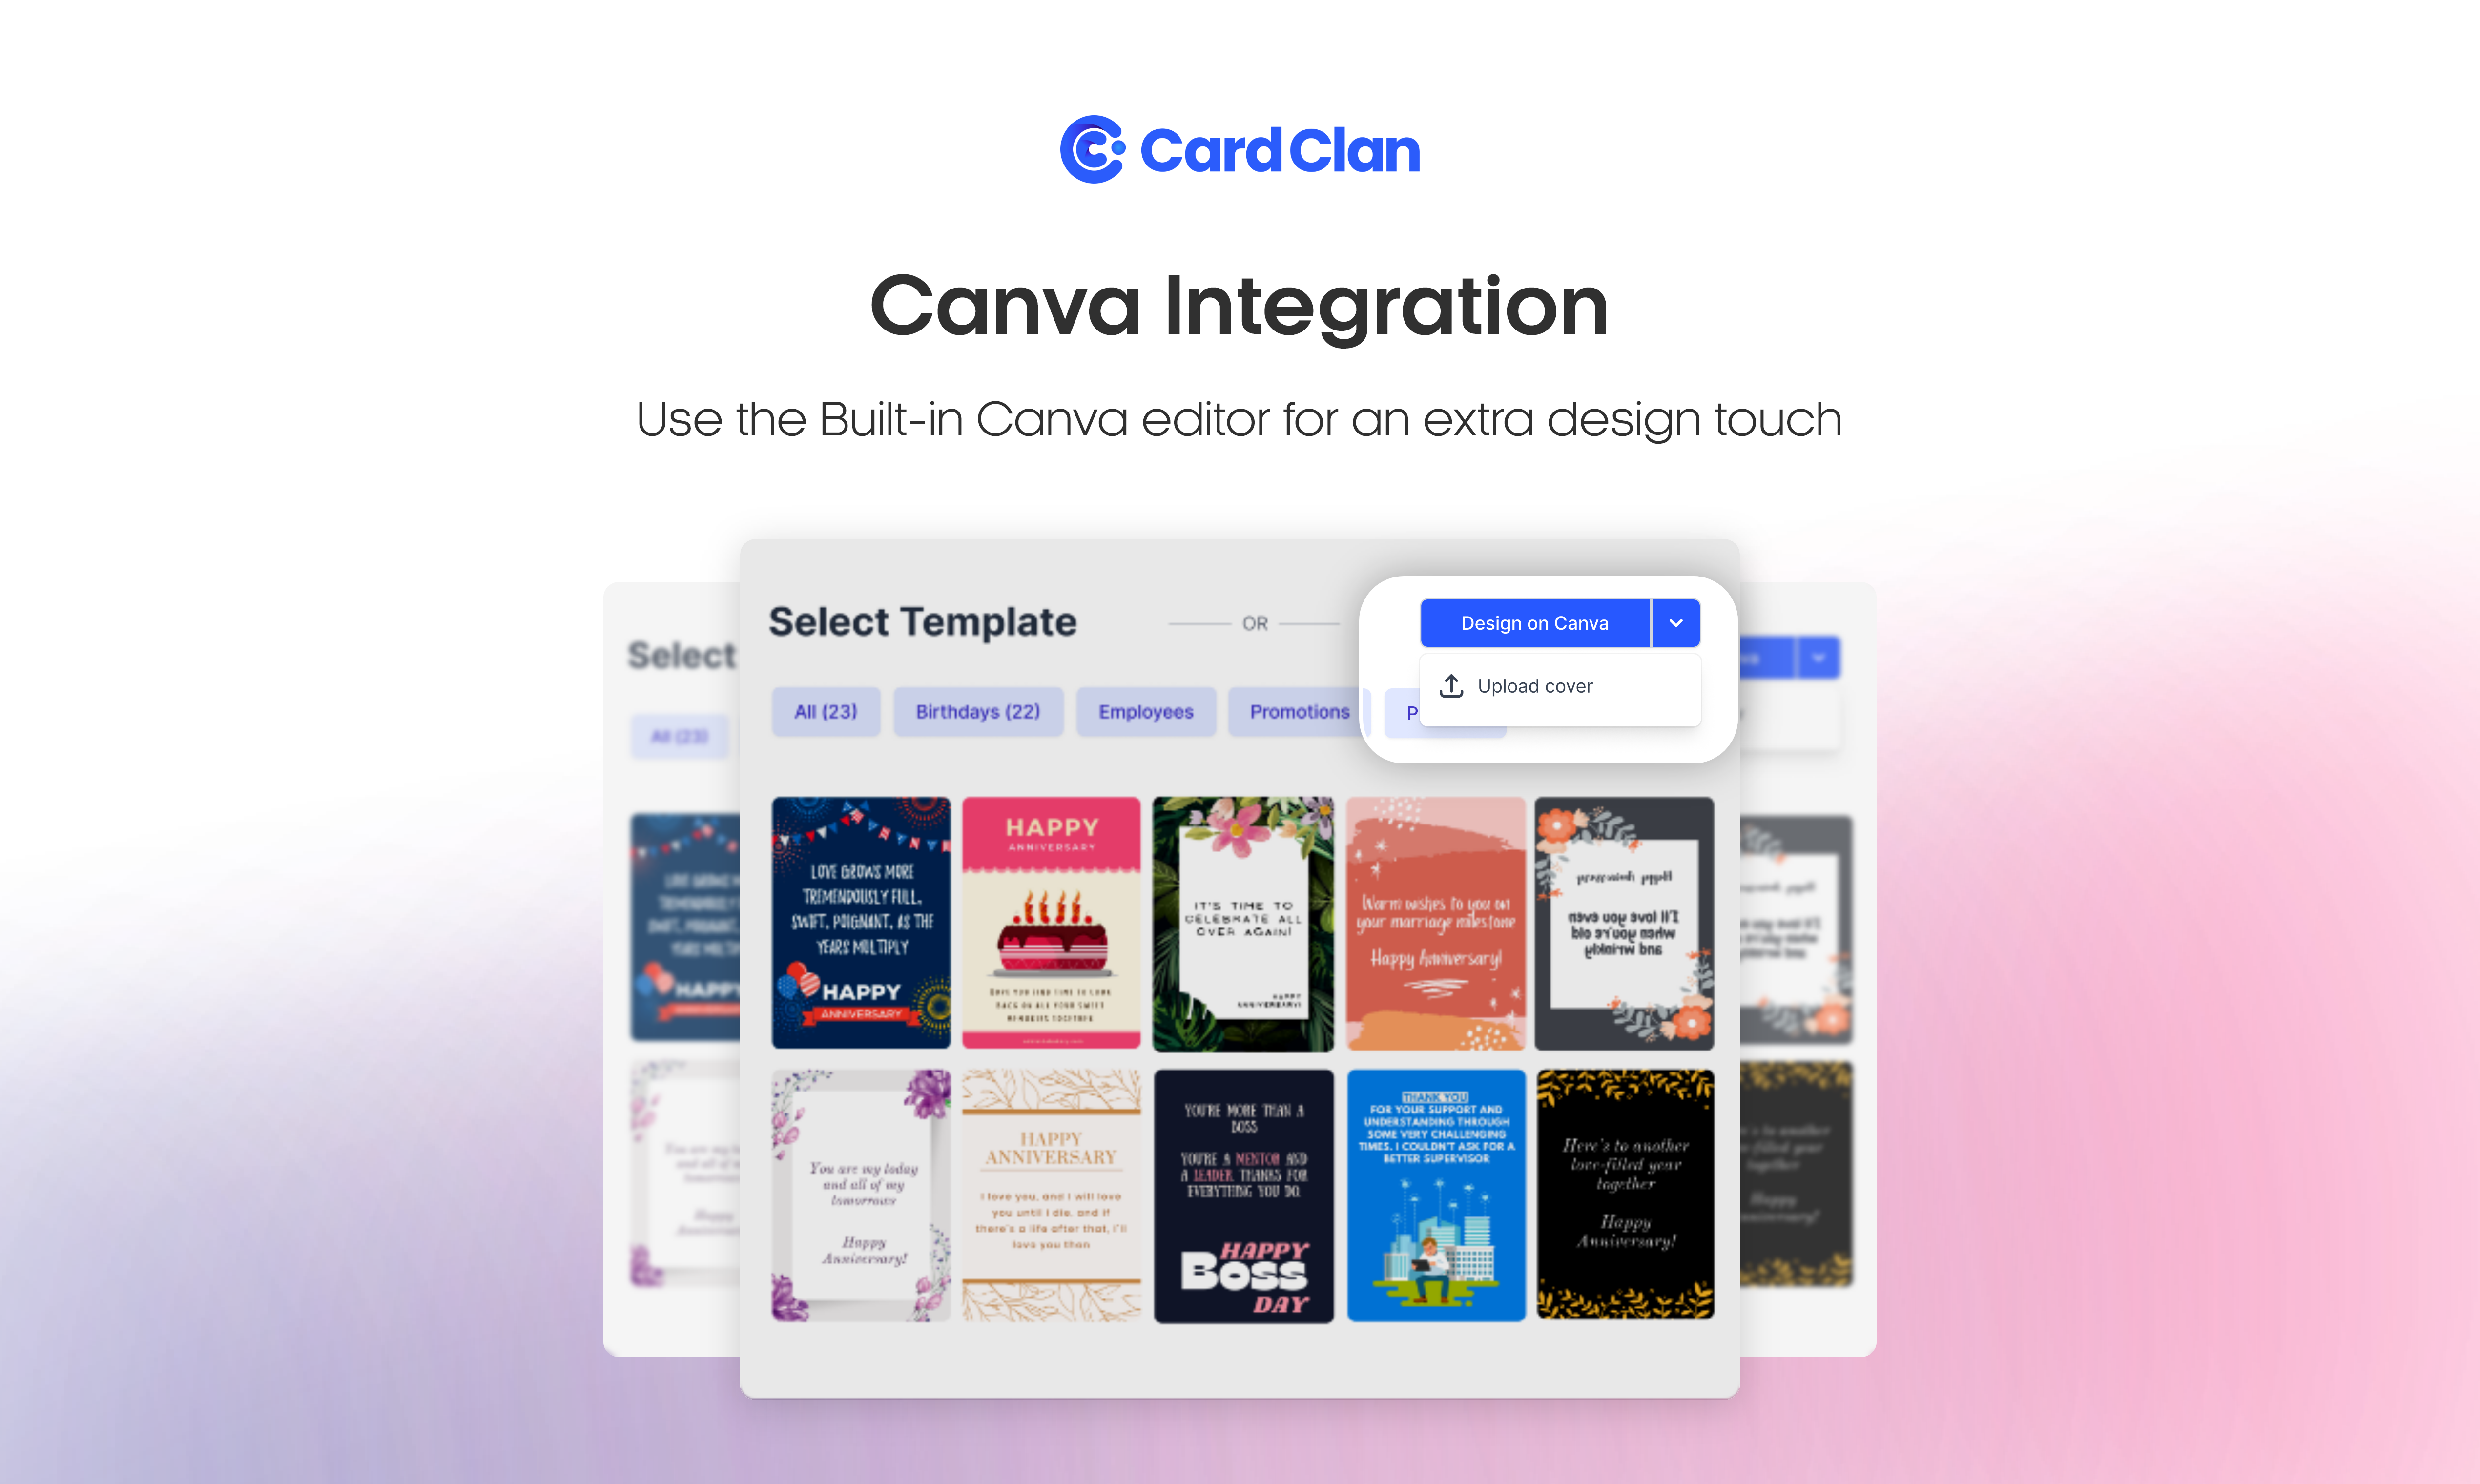 Use Canva Integration to design Cards